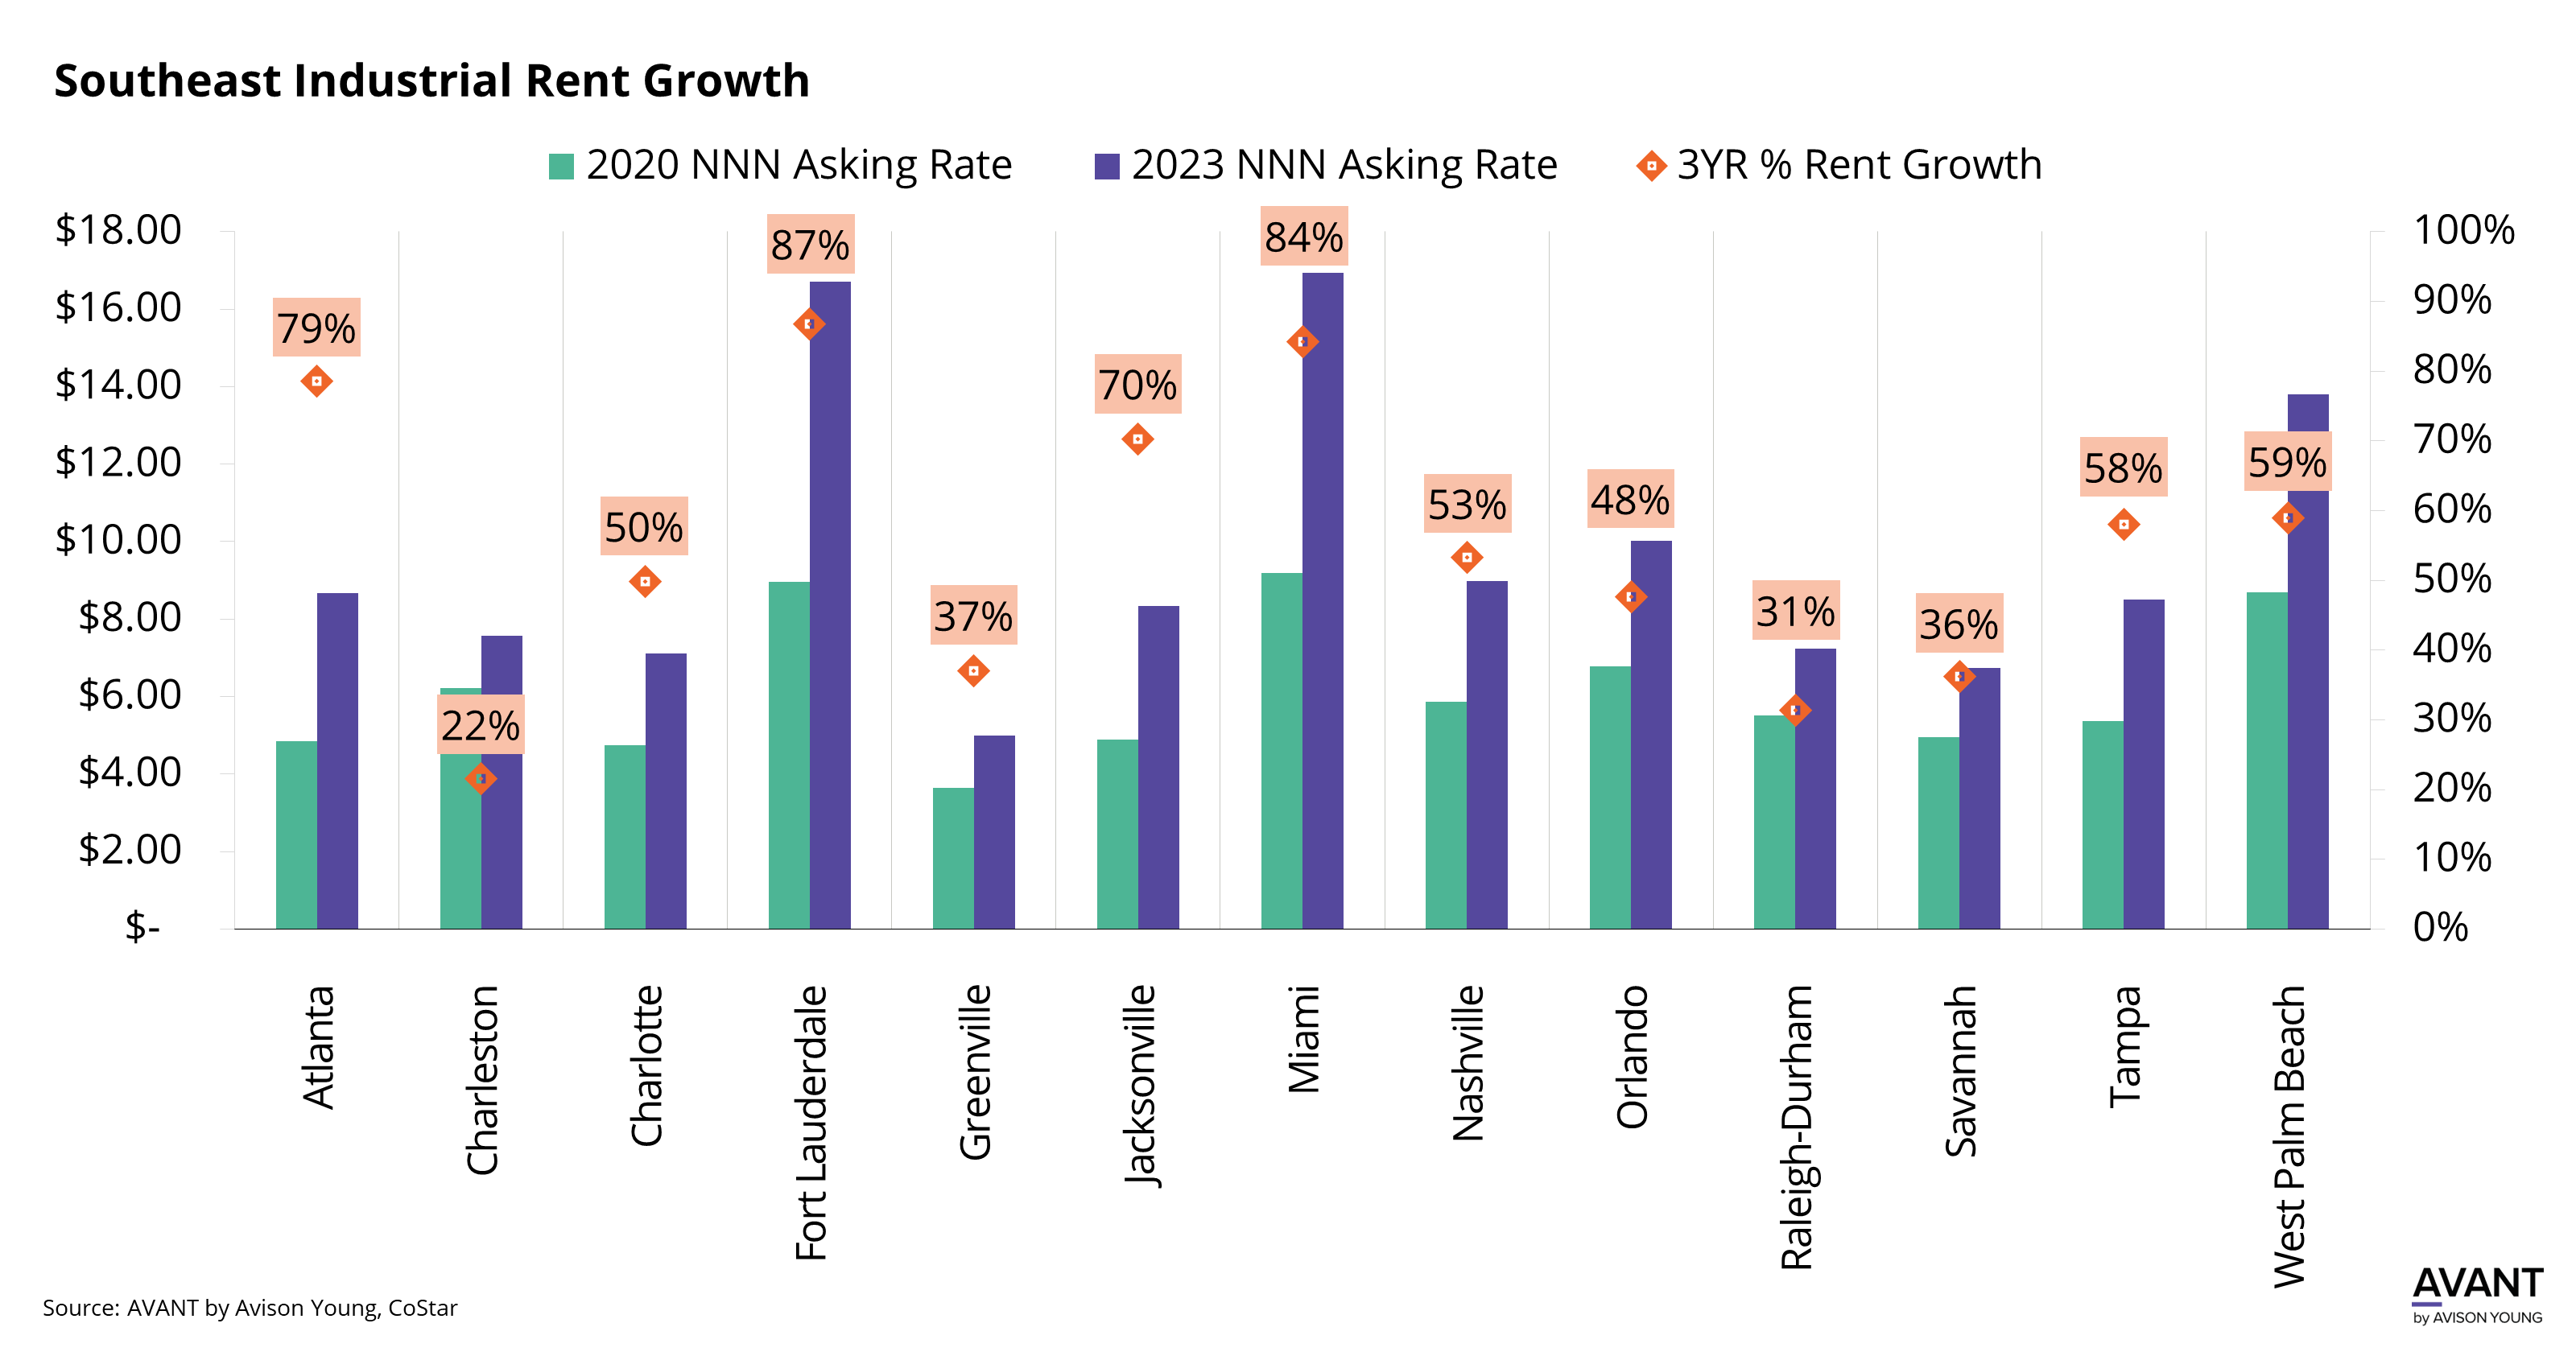 graph of industrial commercial real estate asking rent growth in the Southeast comparing 2020 and 2023